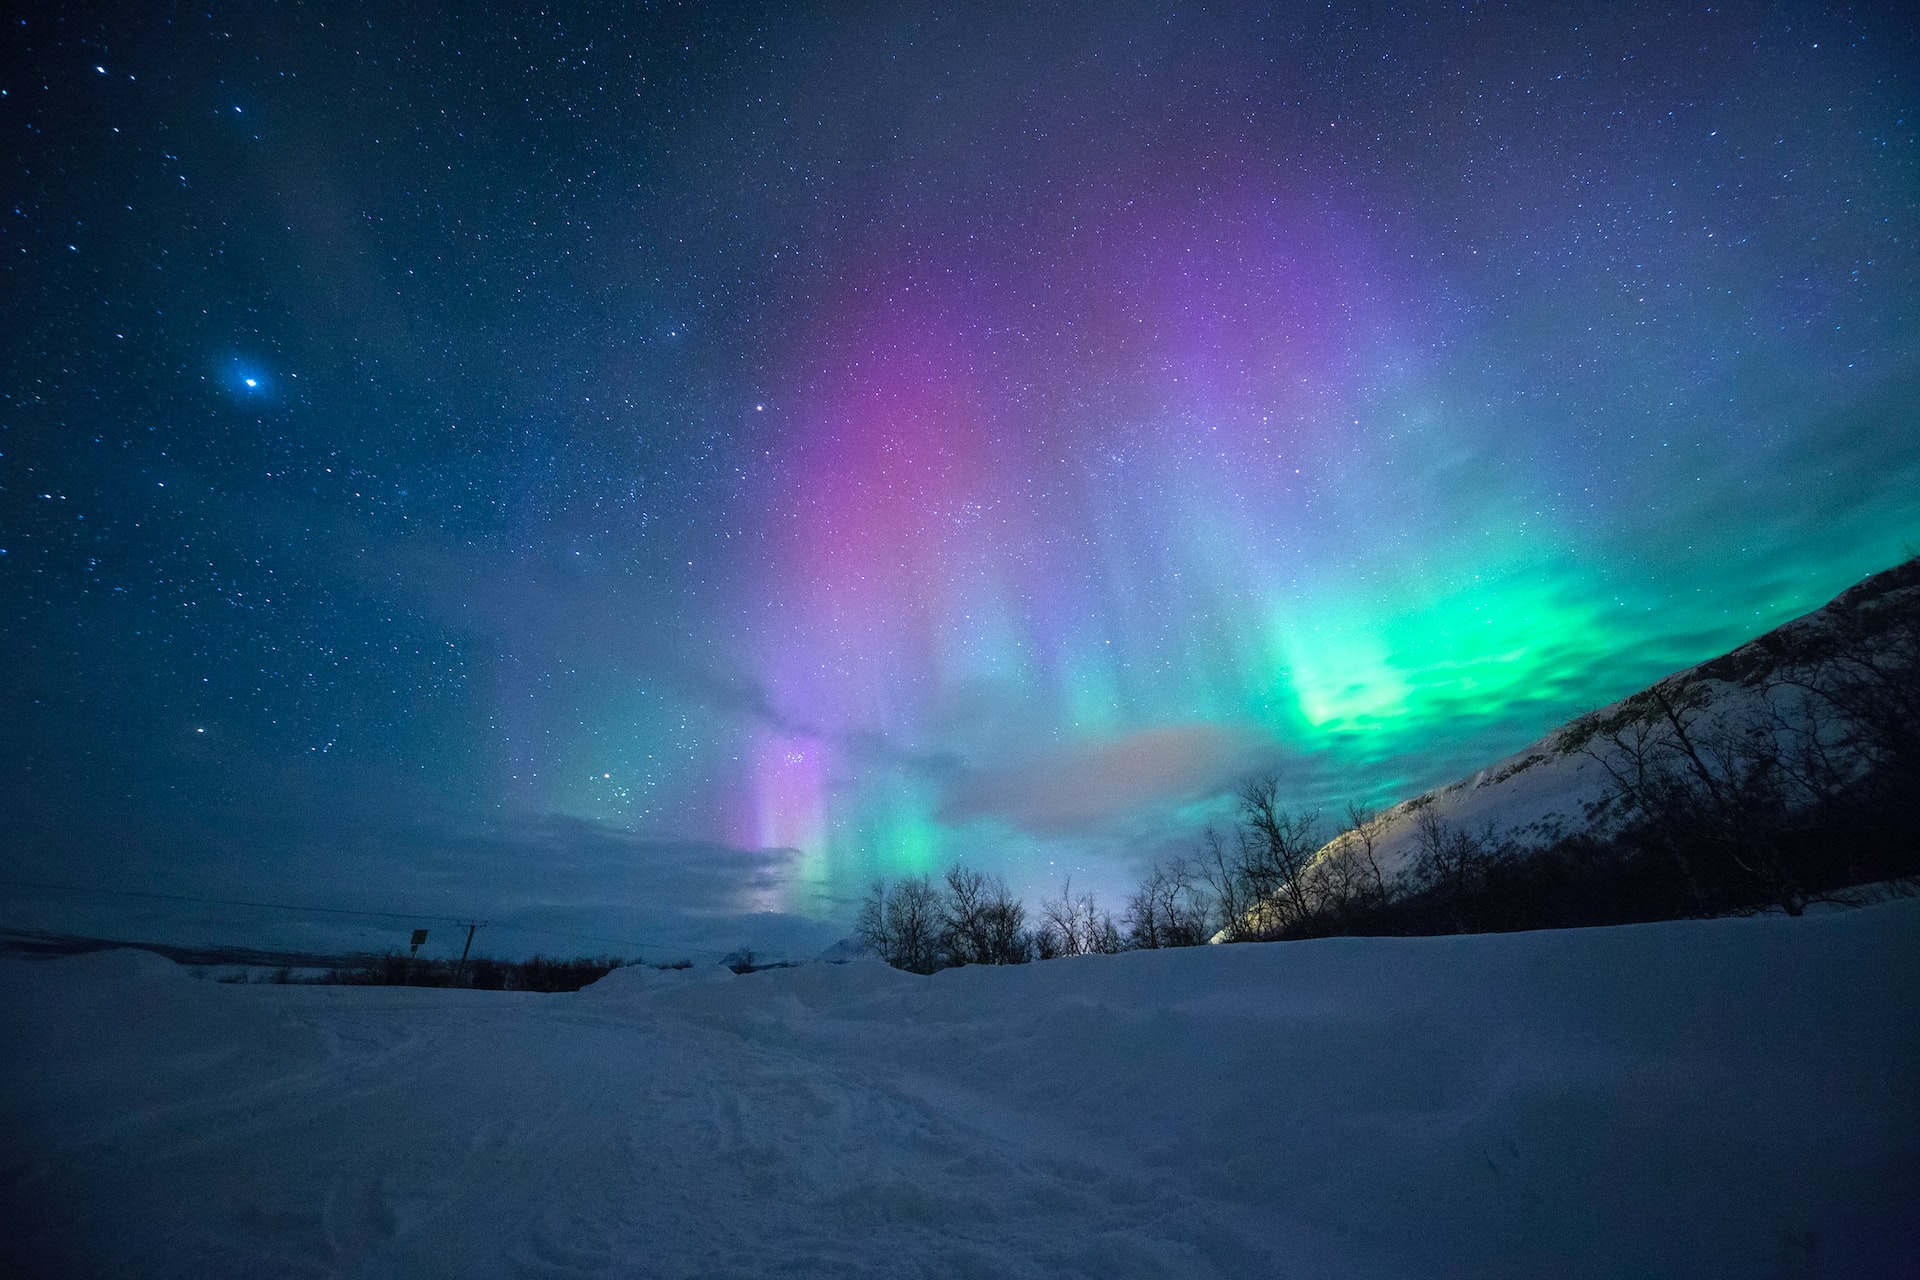 Chasing the Northern Lights in the Yukon Territory: Travel Guide